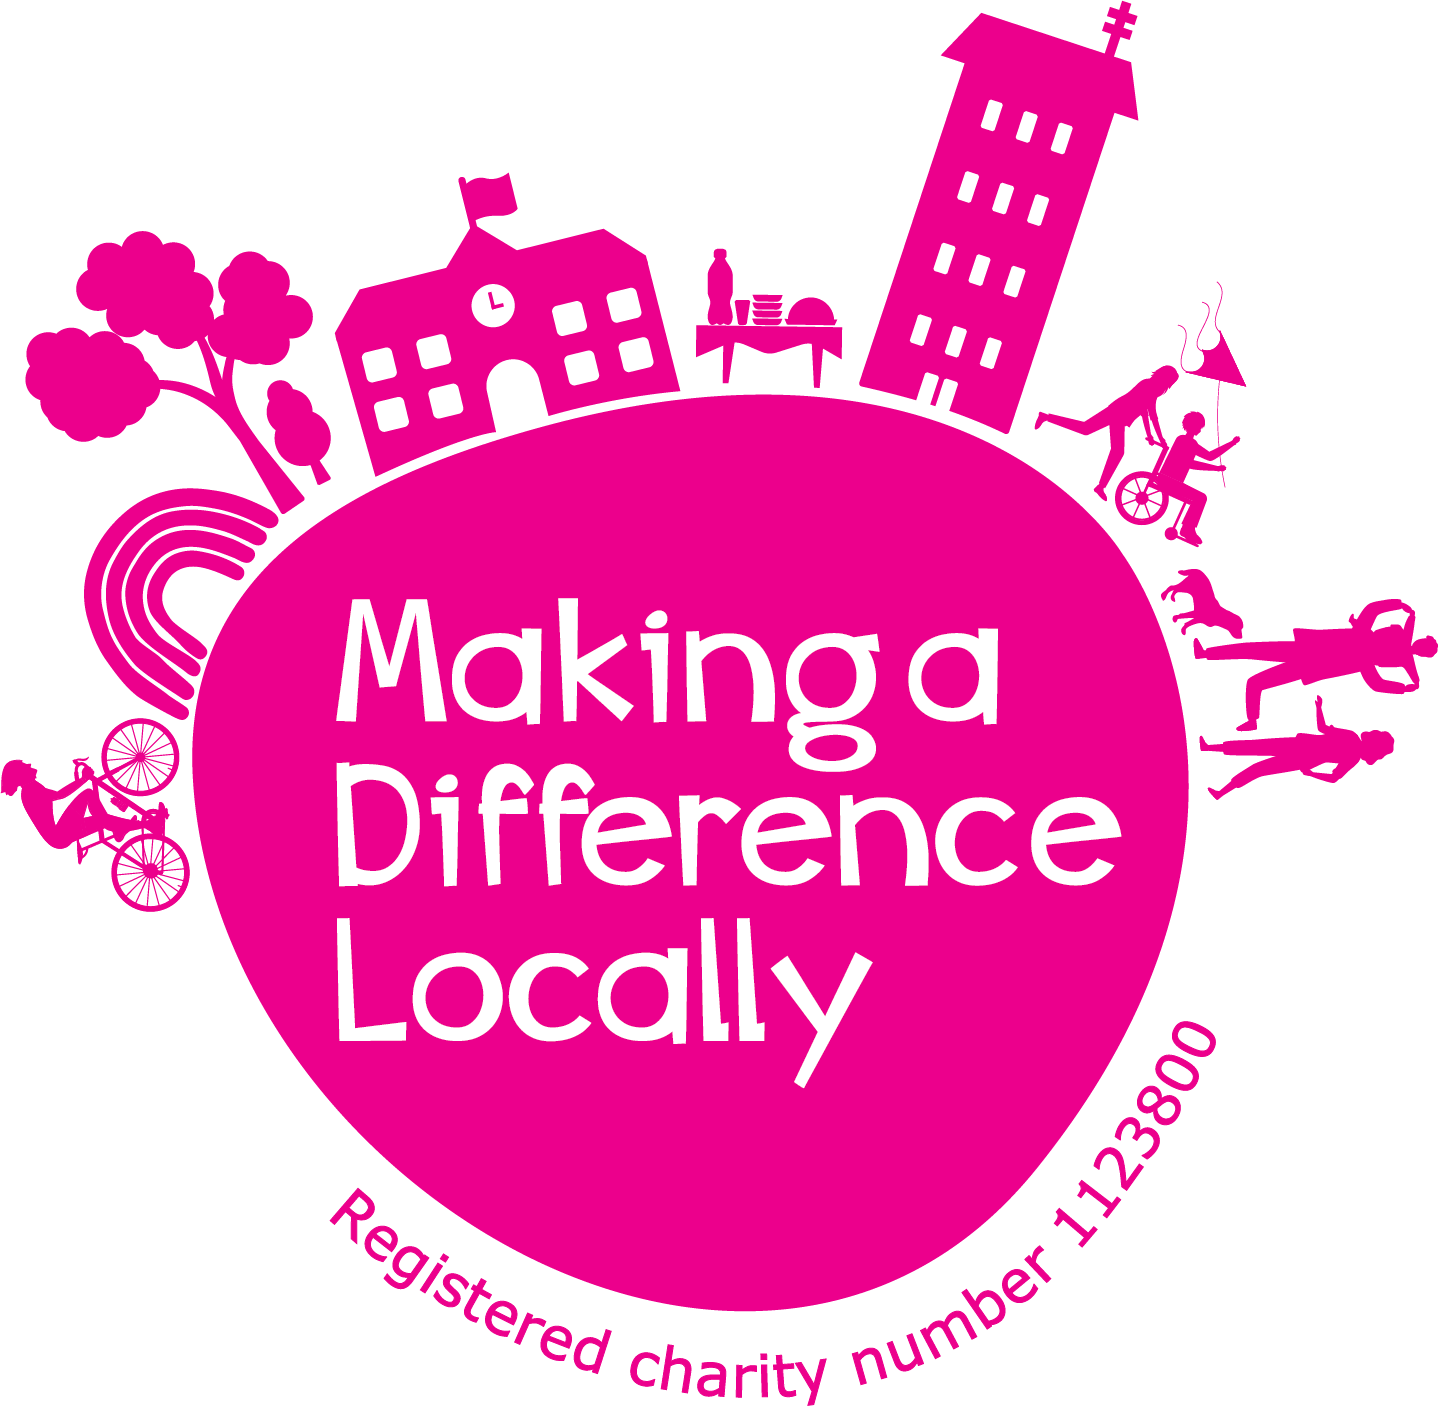 Making a Difference Locally supports UK Charity week